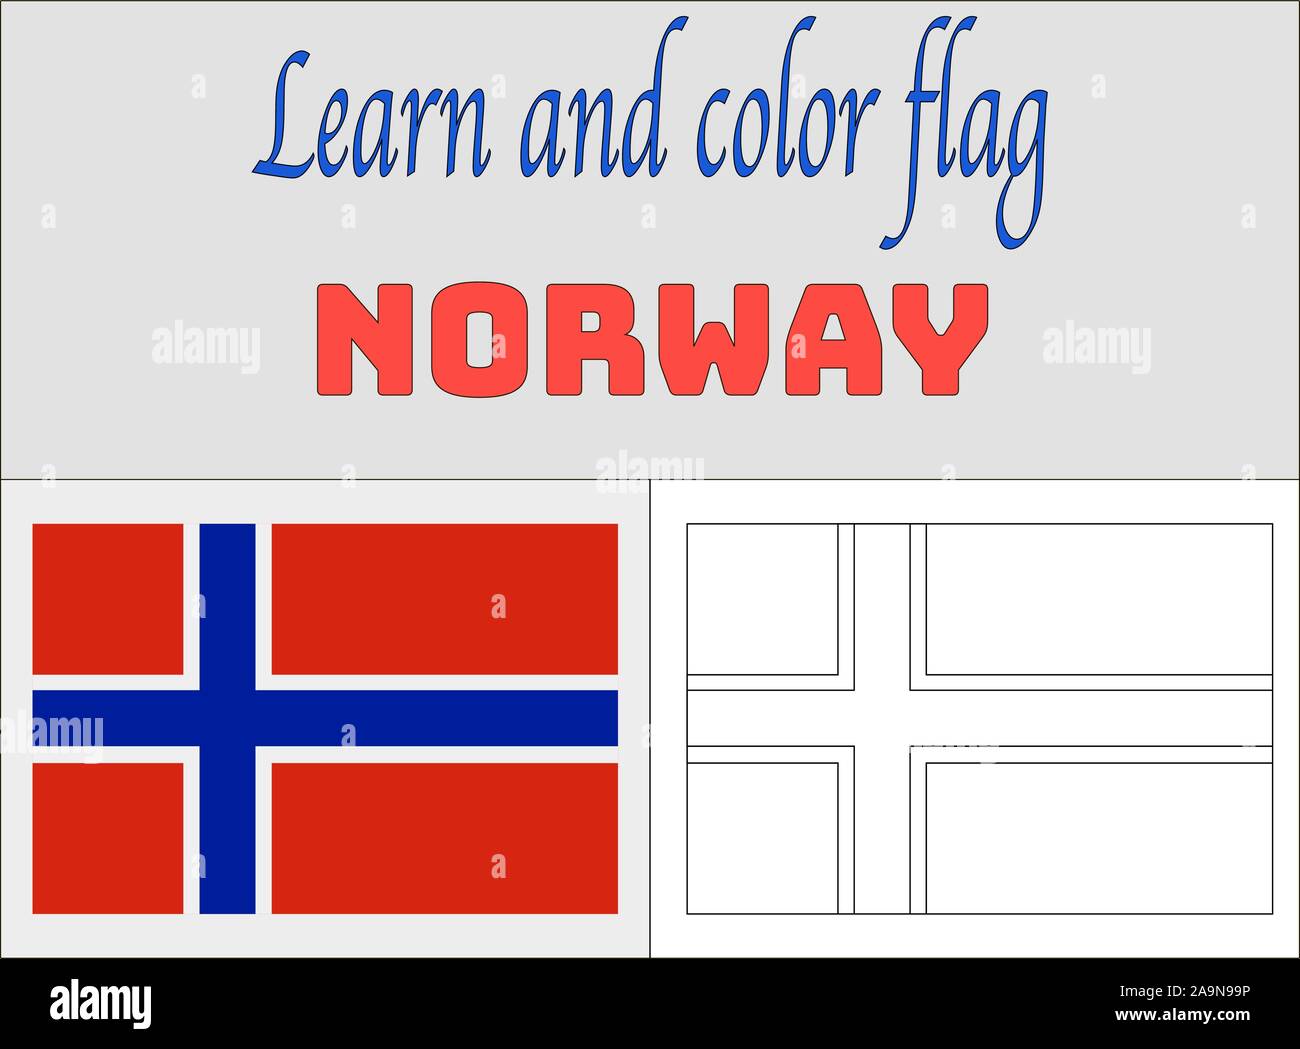 Norway national flag coloring book pages for education and learning original colors proportion vector illustration countries set stock vector image art